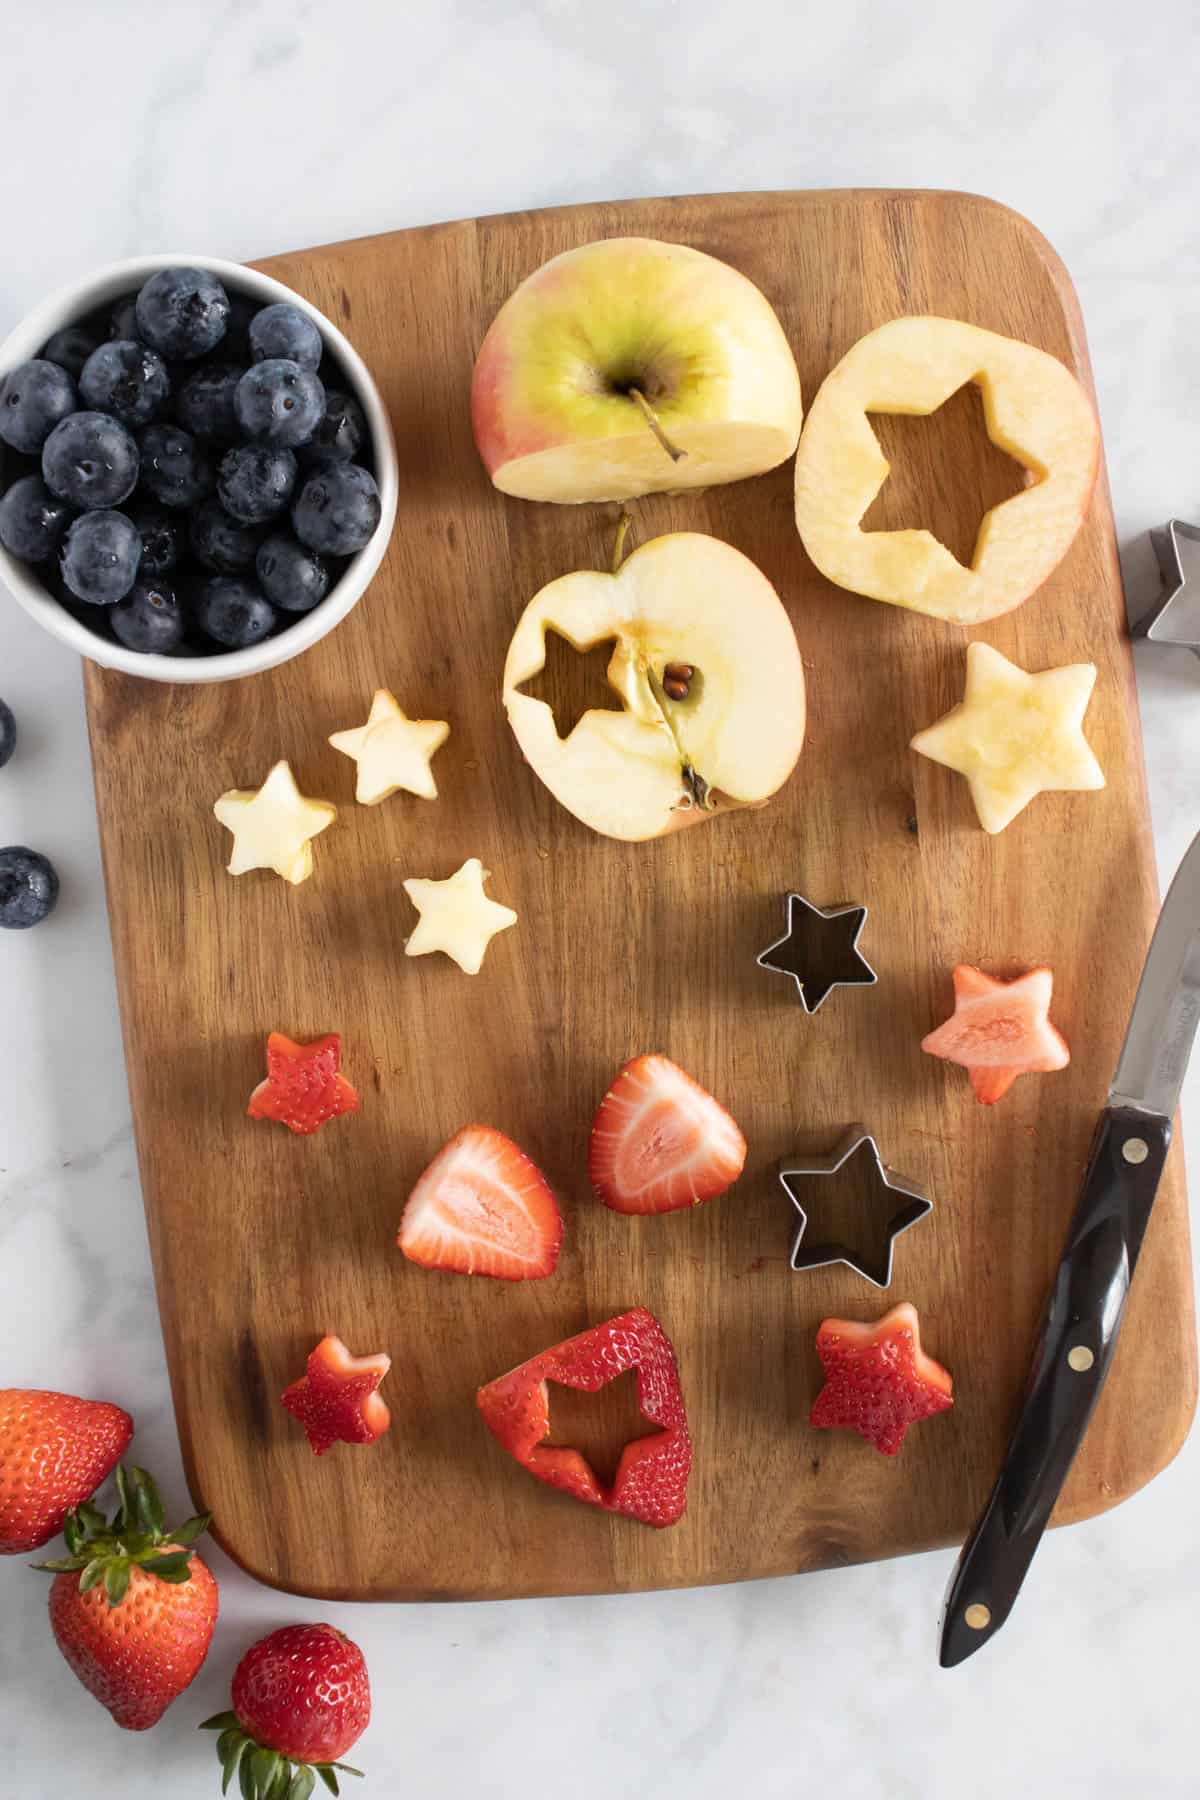 Cutting apple and strawberry slices into straws on a wooden cutting board.